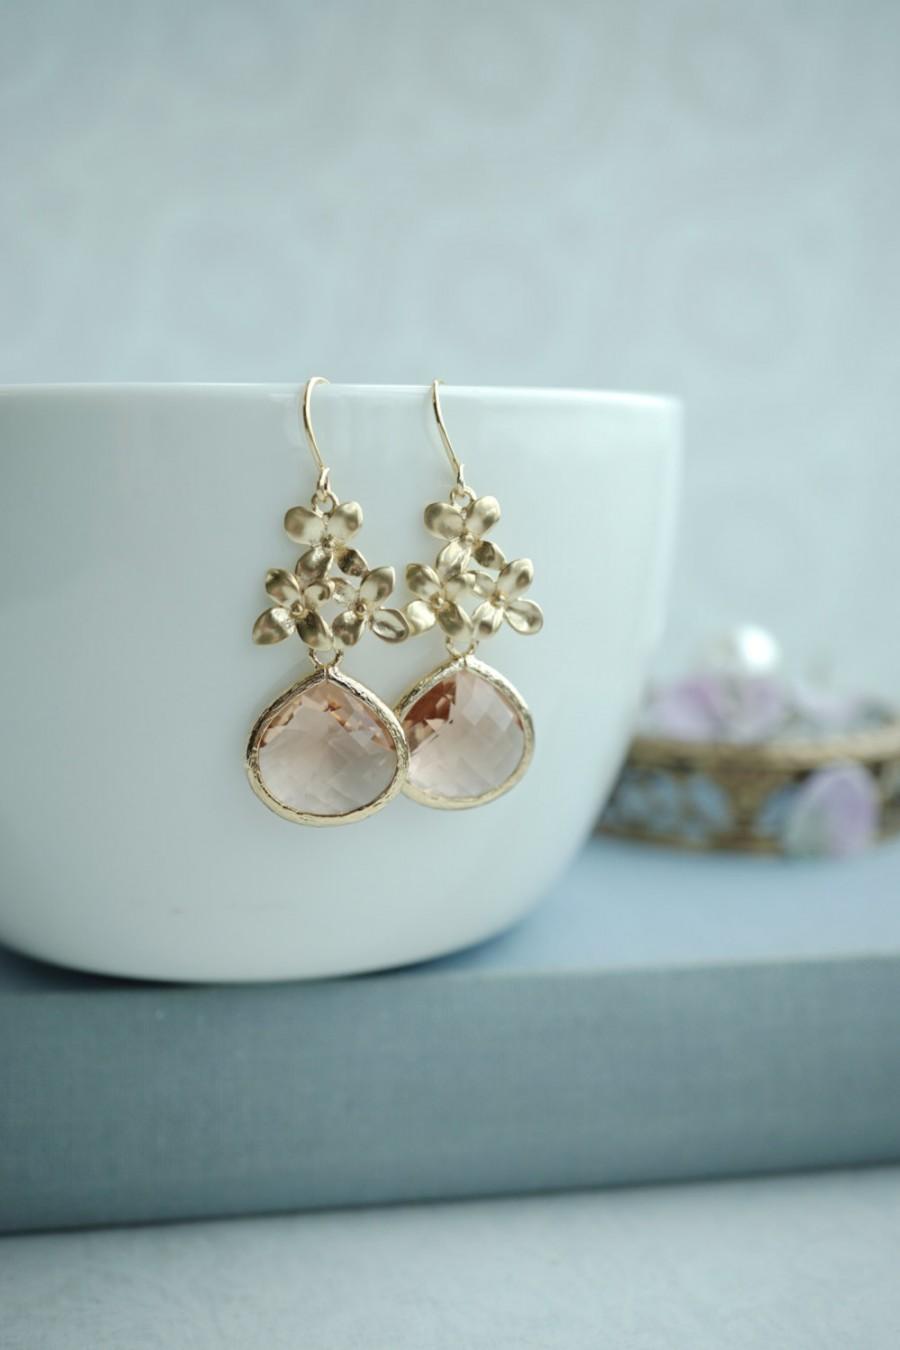 Hochzeit - Champagne Peach Earrings, Gold Champagne Flower Earrings, Bridesmaids Gift, Mothers Day, Cherry Blossom Dangle Earrings, Wife Valentine Gift